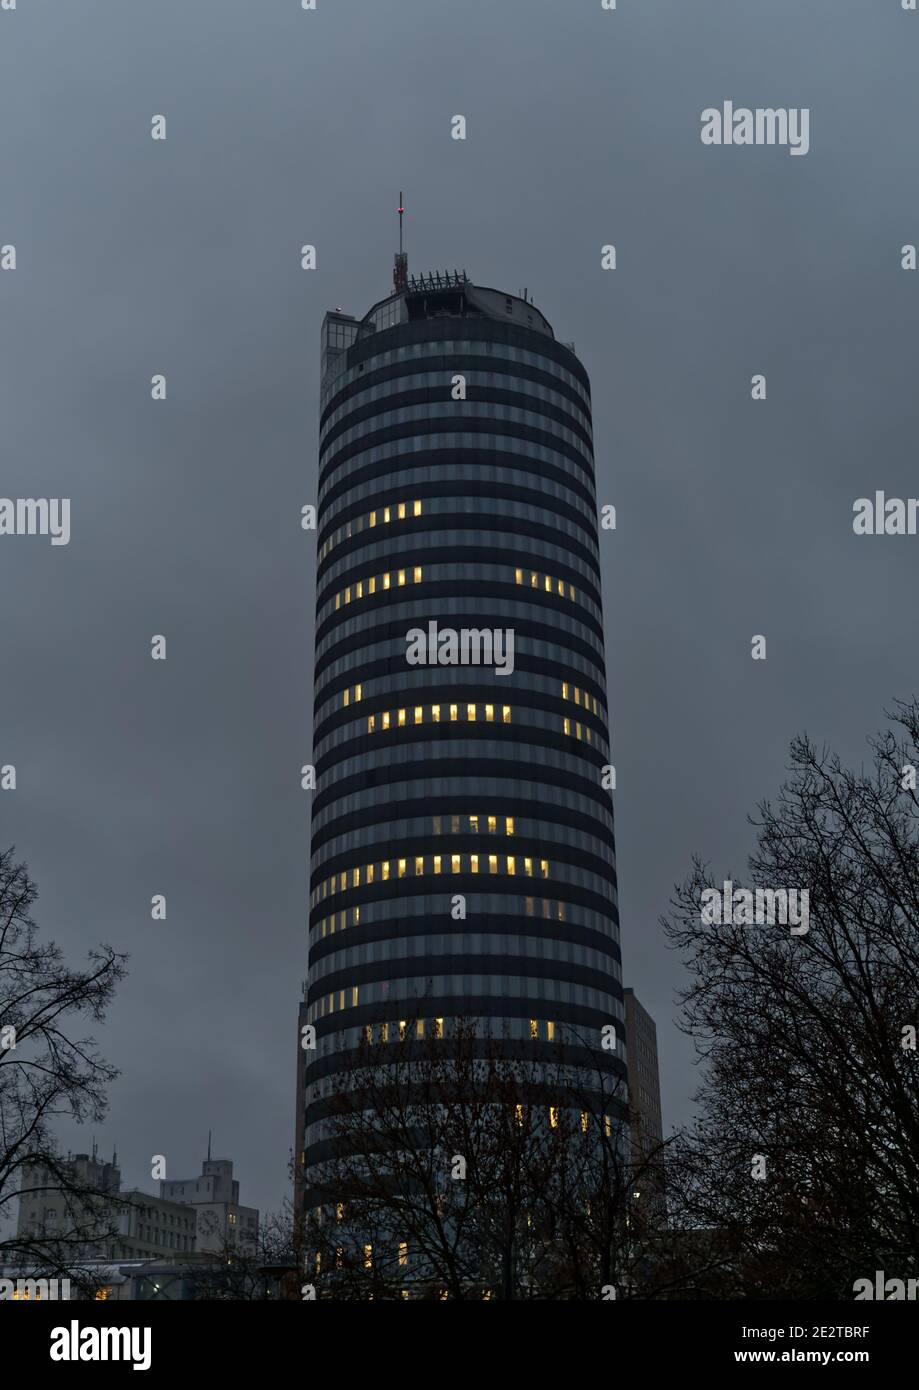 Old intershop tower in jena downtown in winter 2020 Stock Photo